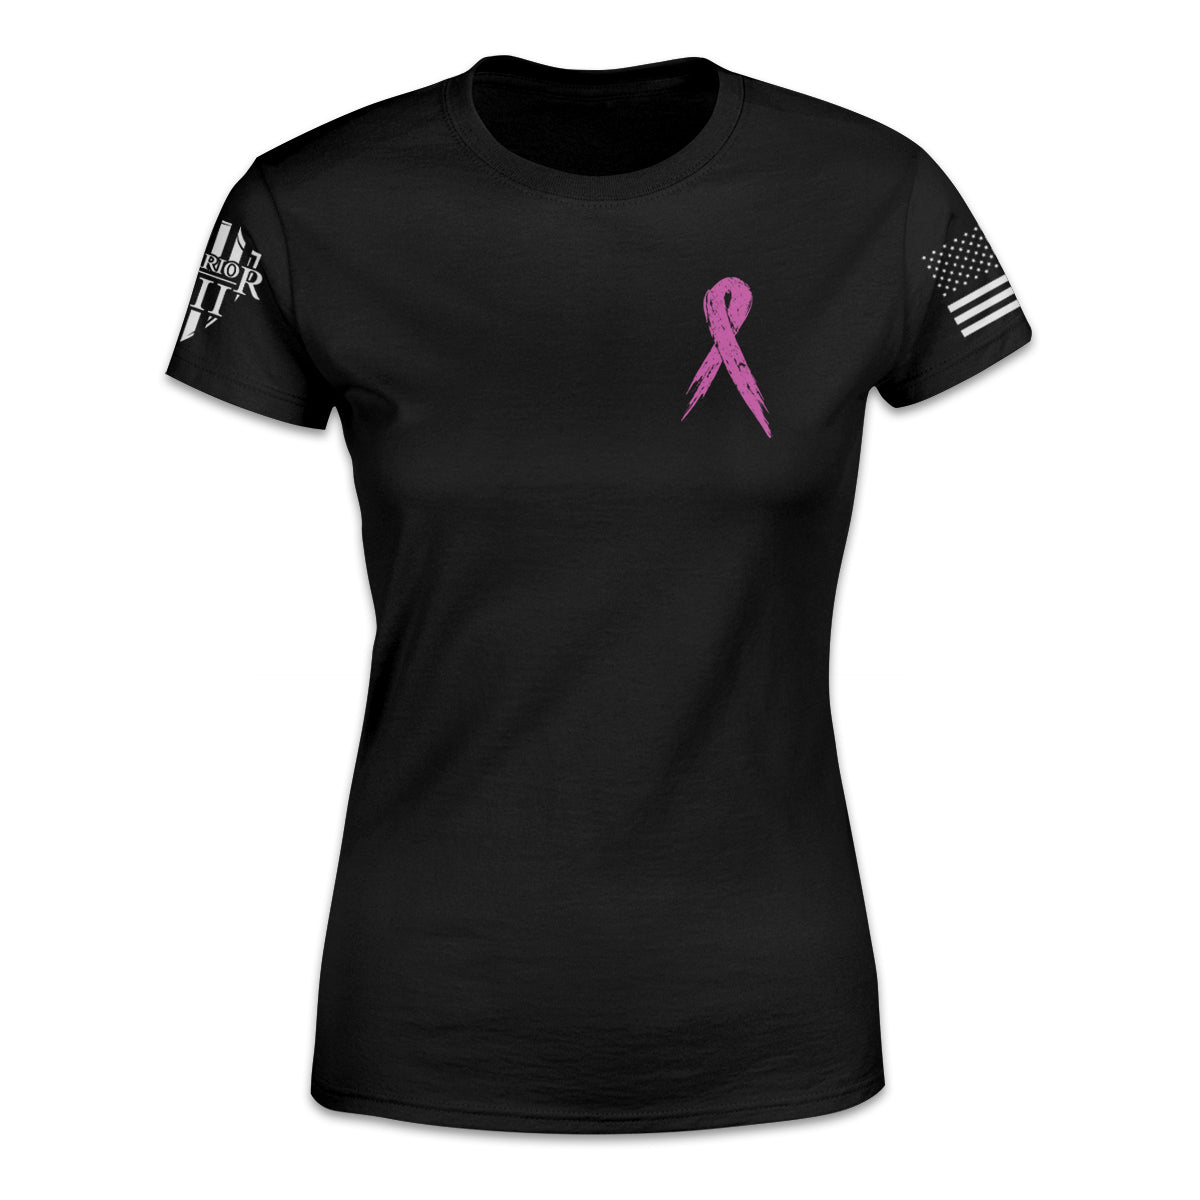 A black t-shirt with a pink ribbon for breast cancer awareness.